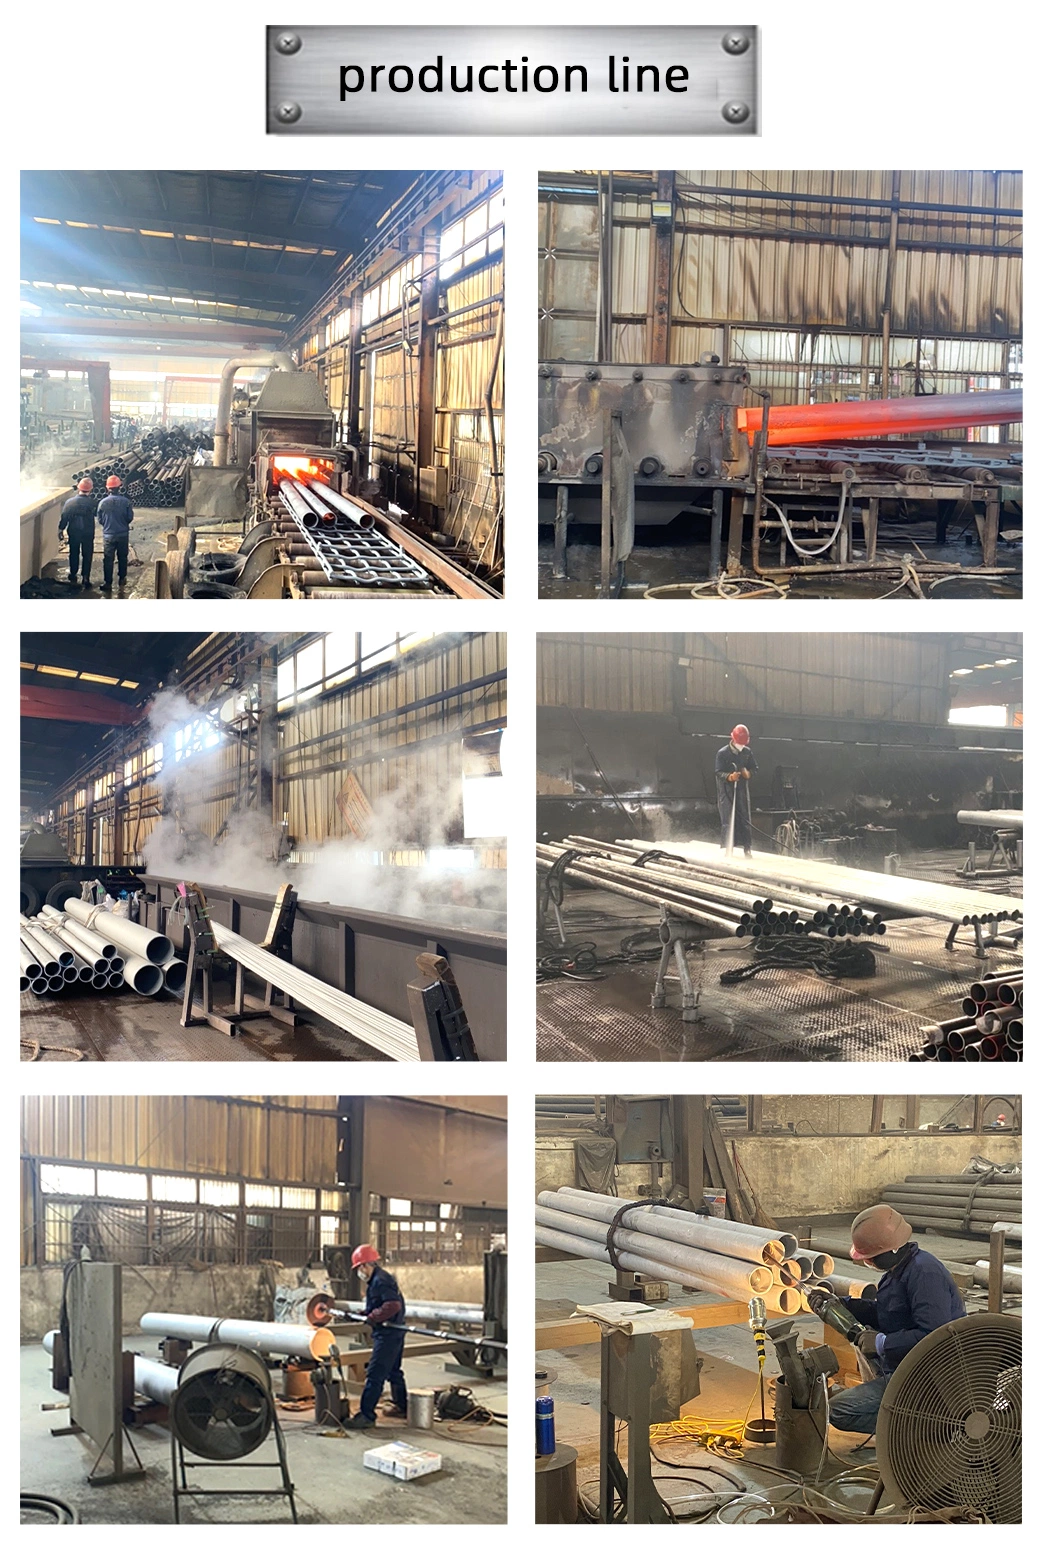 Seamless Steel Pipe Produced in China Factory 304h 321H 347H 310h 310S Seamless Pipe for Boilers